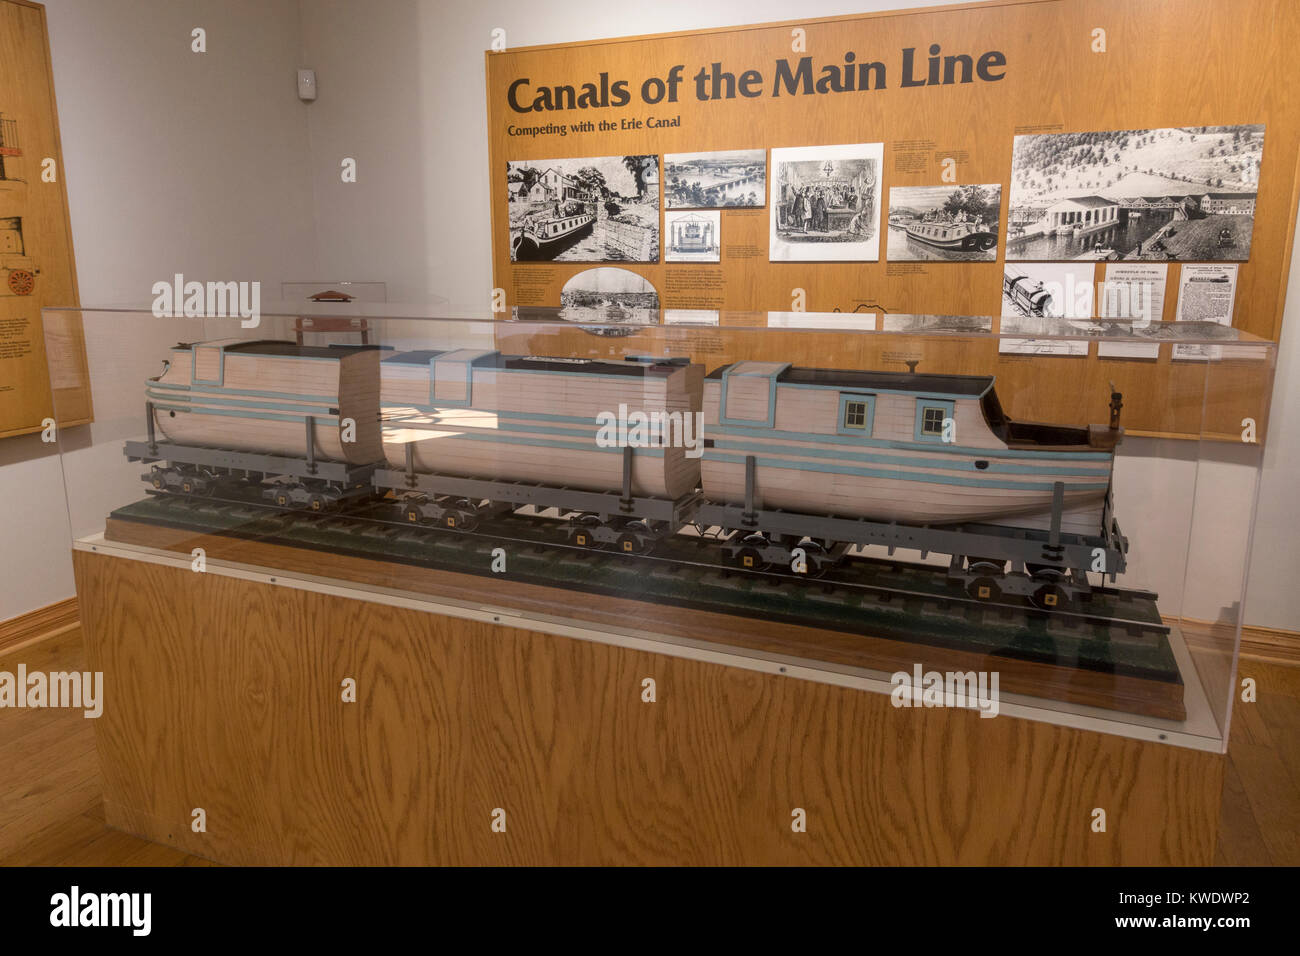 Model showing how canal boats were carried on the Allegheny Portage Railroad (a National Historic Site), Blair county, Pennsylvania, United States. Stock Photo